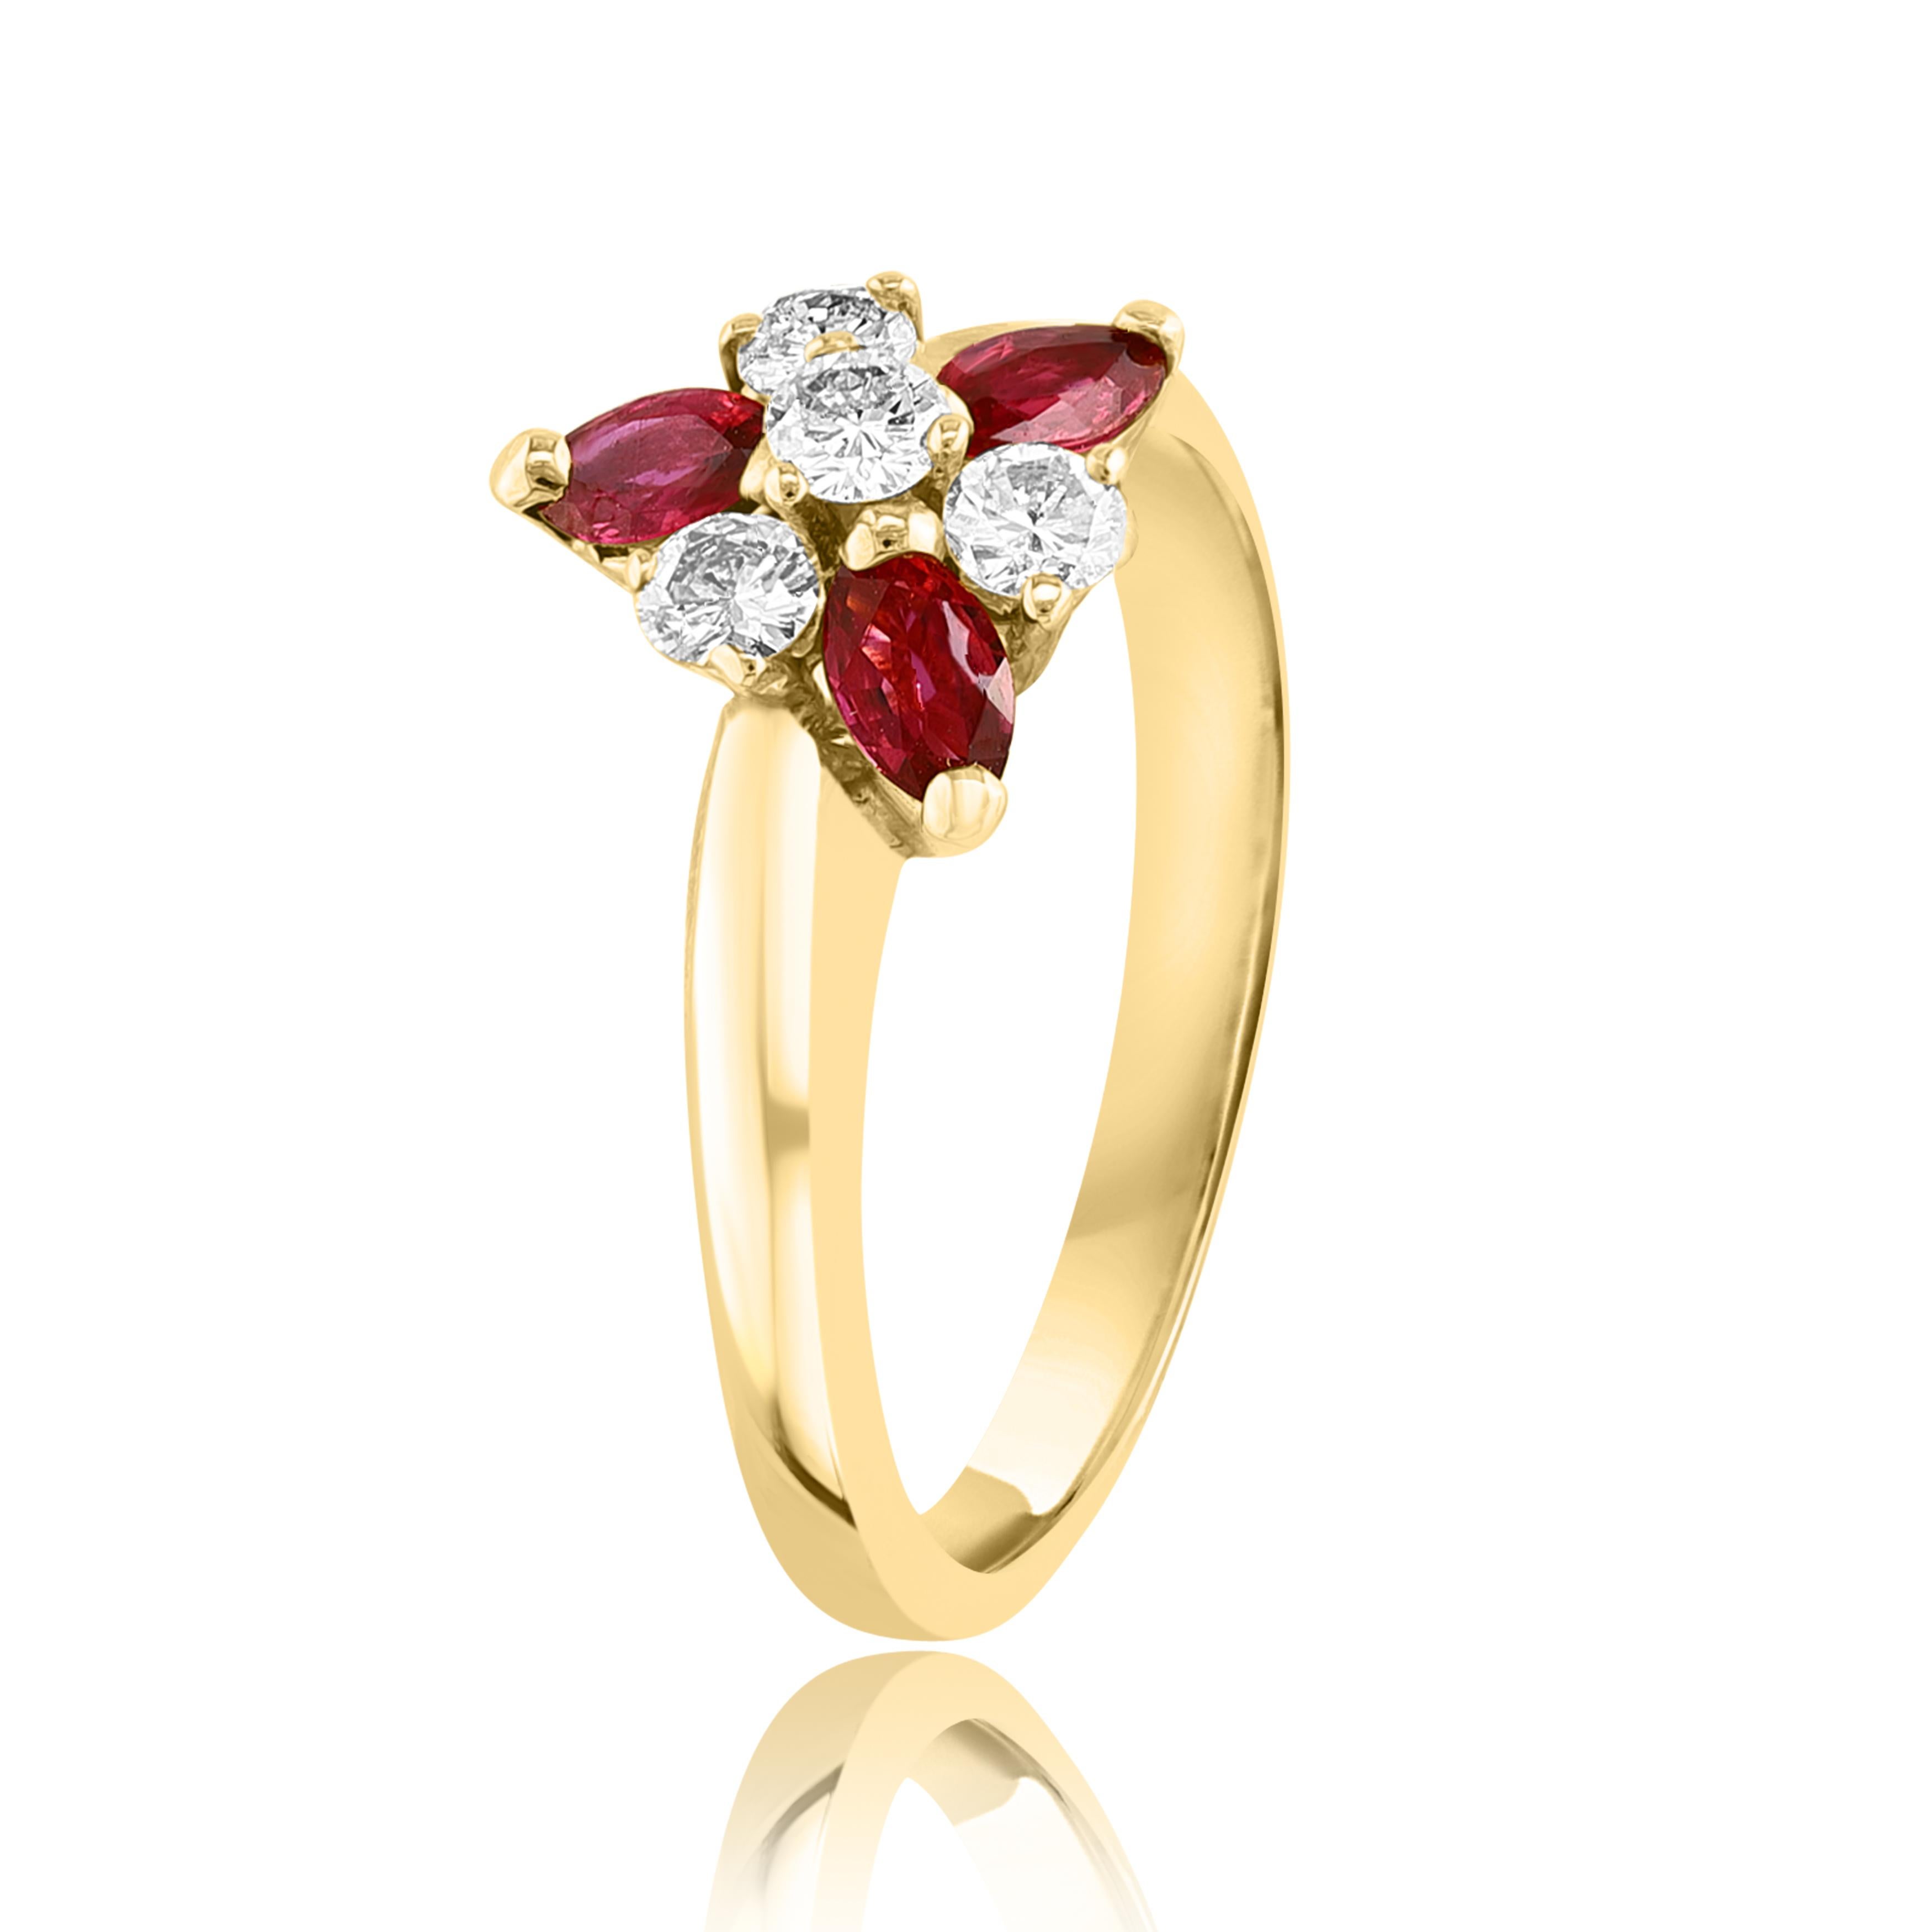 This classic fashion ring showcases 3 marquise shape red rubies weighing 0.36 carats and 4 round diamonds weighing 0.20 carats in total and is made of 14K Yellow Gold.